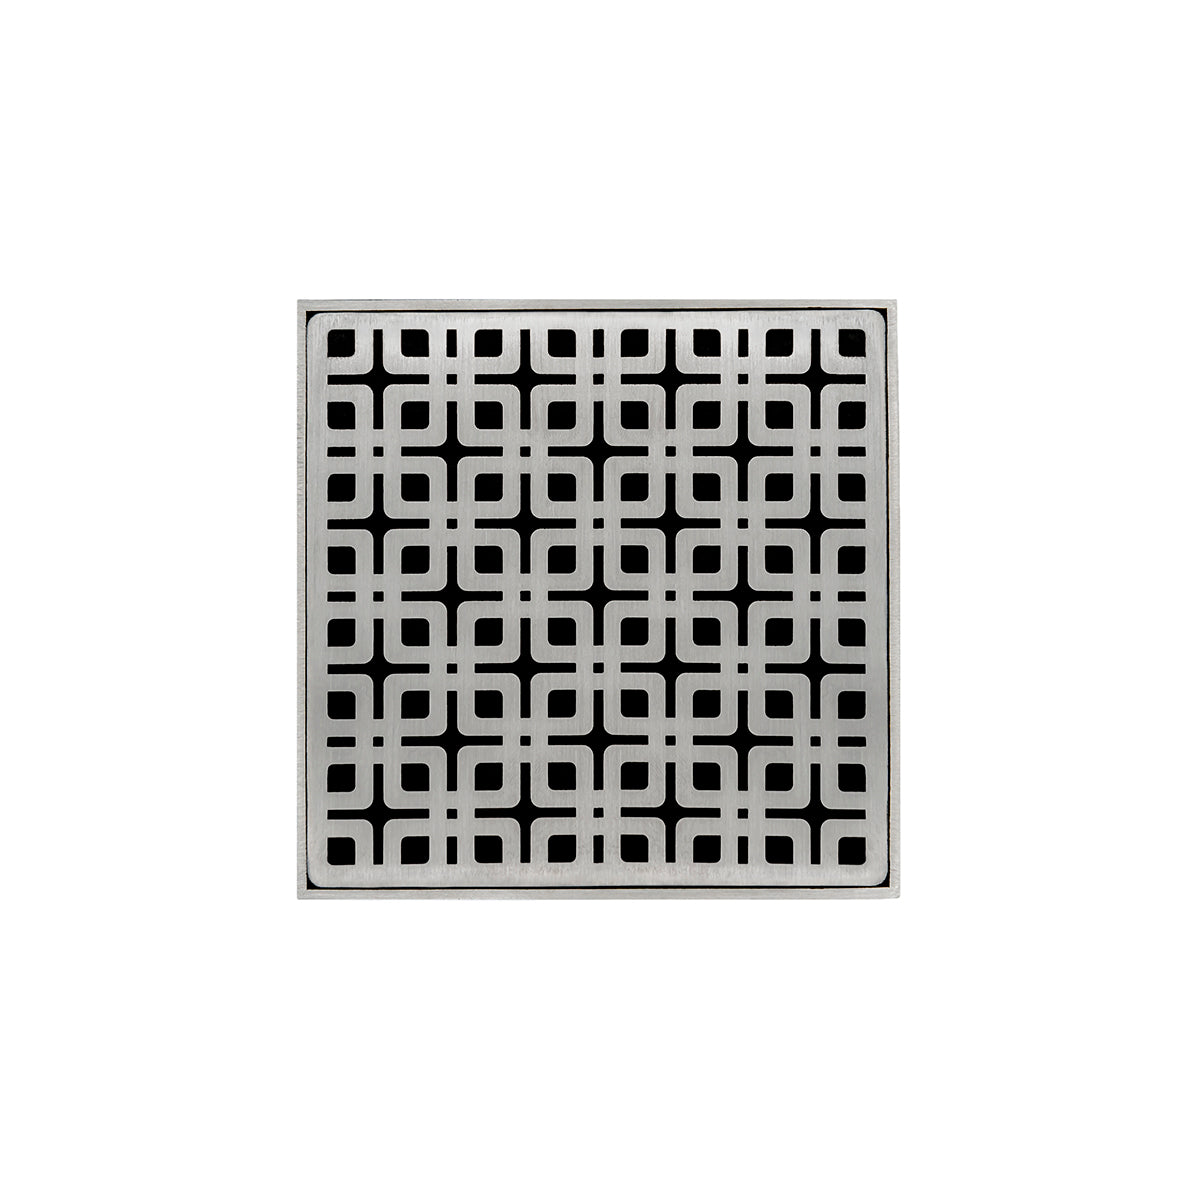 Infinity Drain 5" x 5" KD 5 Premium Center Drain Kit with Link Pattern Decorative Plate with ABS Drain Body, 2" Outlet